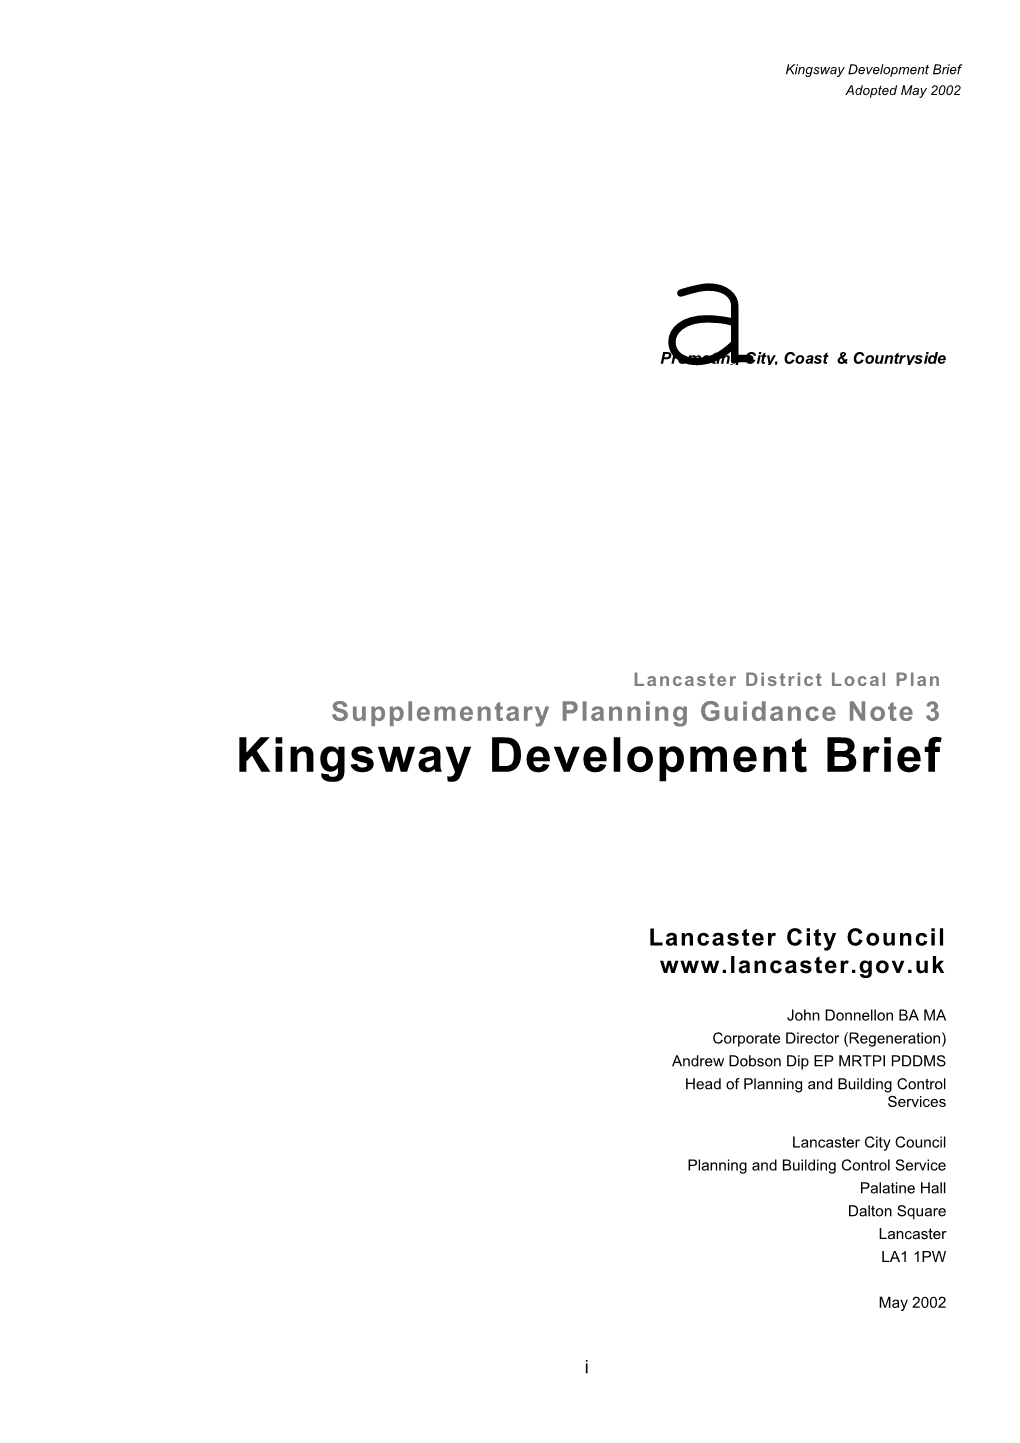 Kingsway Development Brief Adopted May 2002